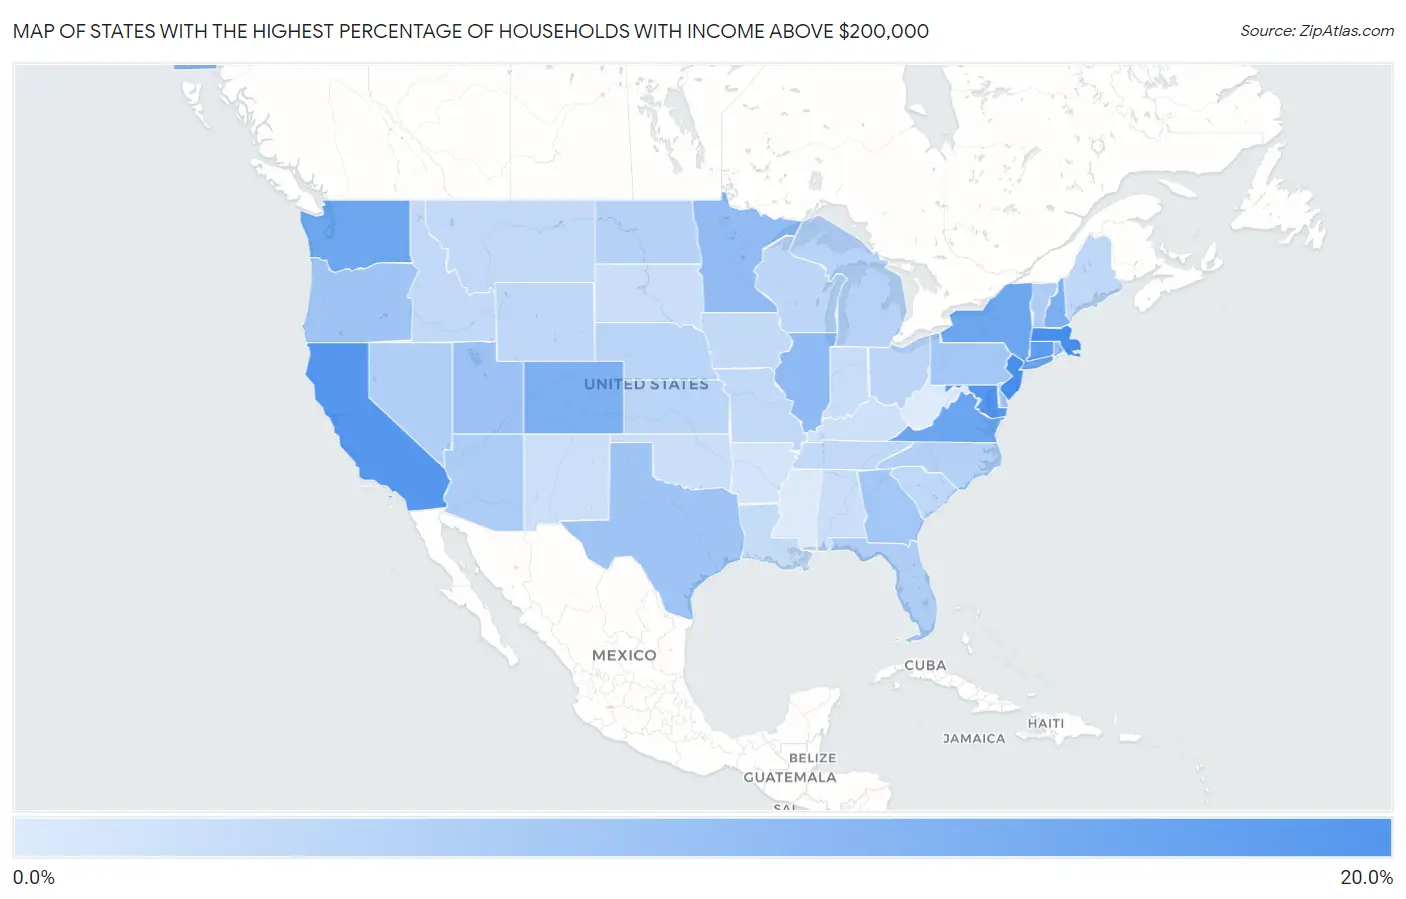 States with the Highest Percentage of Households with Income Above $200,000 in the United States Map